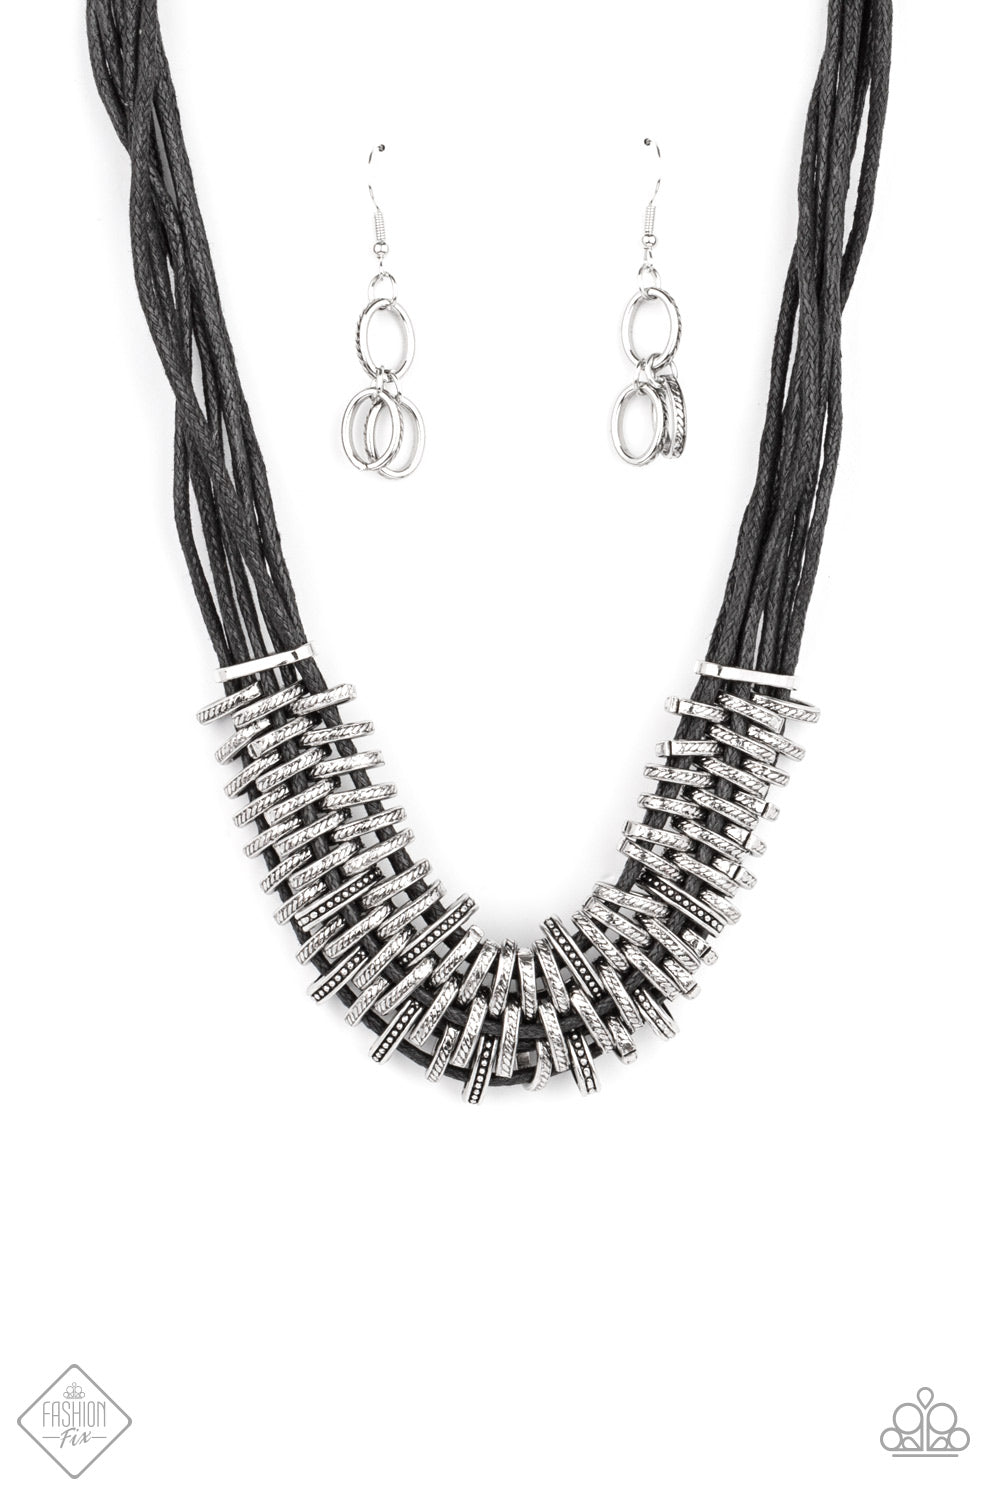 Lock, Stock, and SPARKLE Black-Necklace